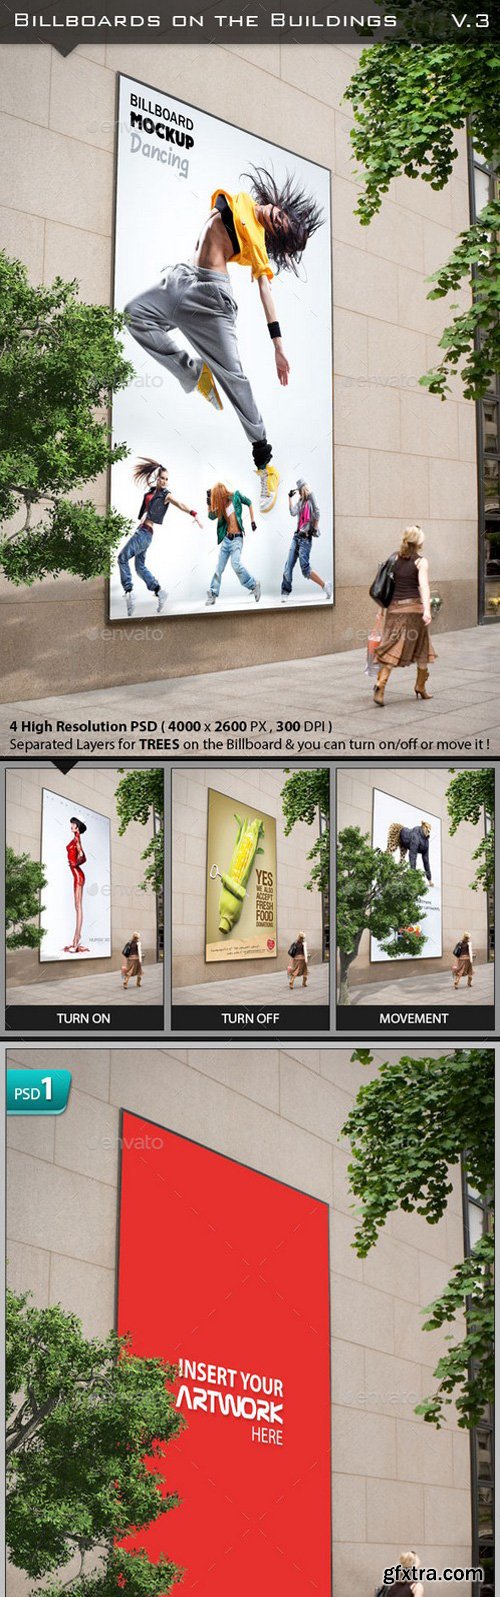 Graphicriver - 11803144 Billboards On The Buildings Mockup